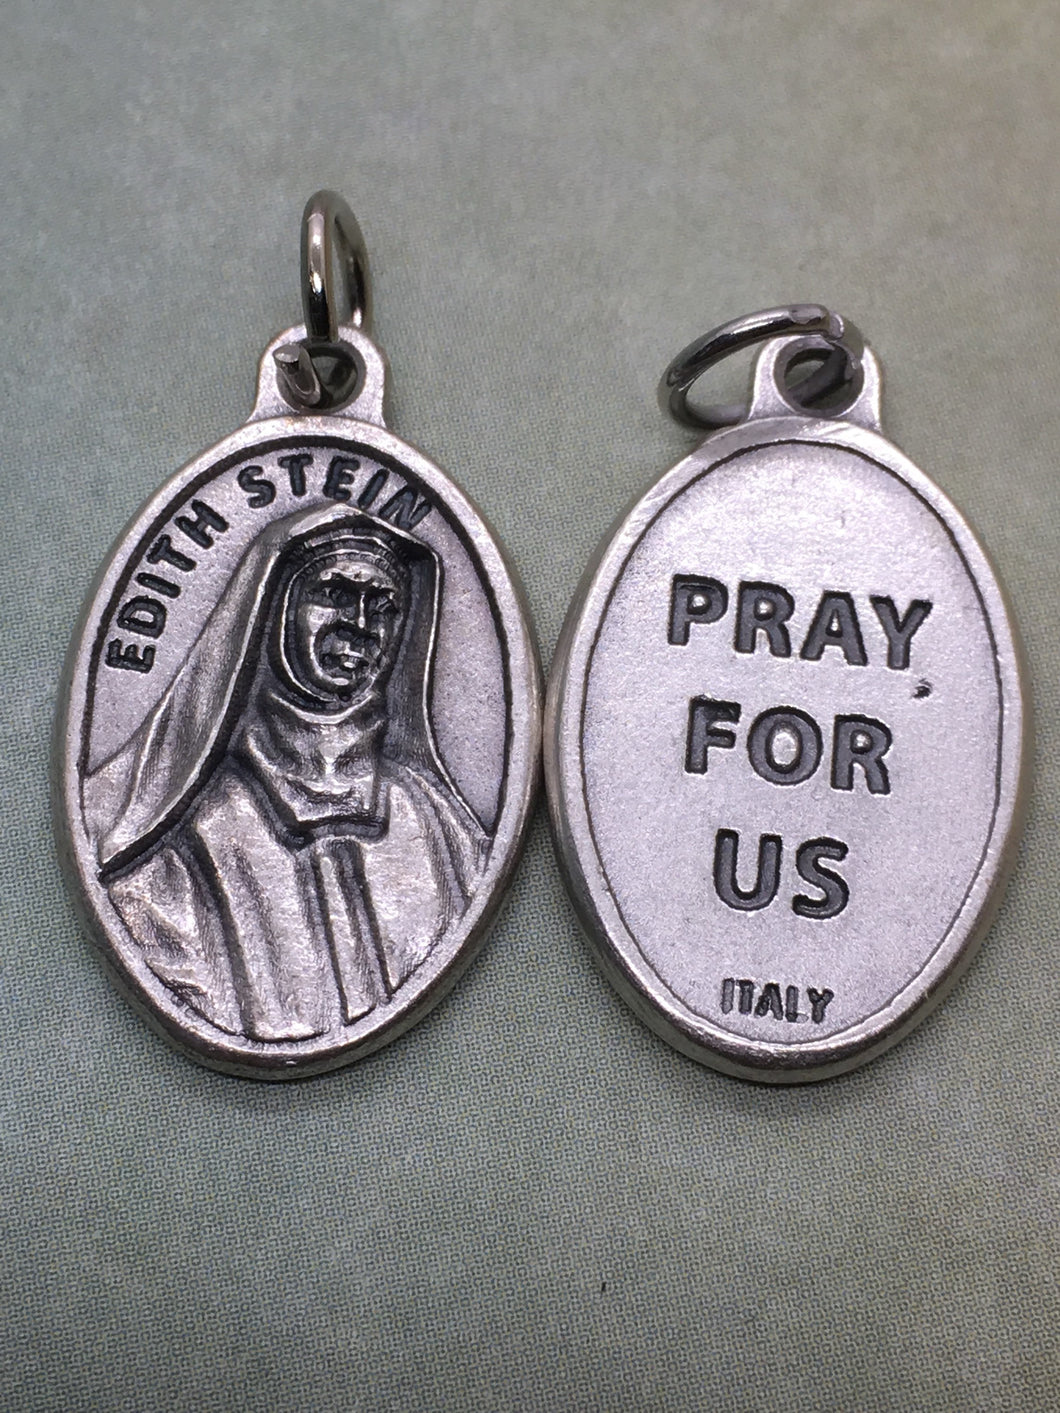 St. Teresa Benedicta of the Cross holy medal - Edith Stein - Catholic saint - patron of Europe, martyrs, against the death of parents